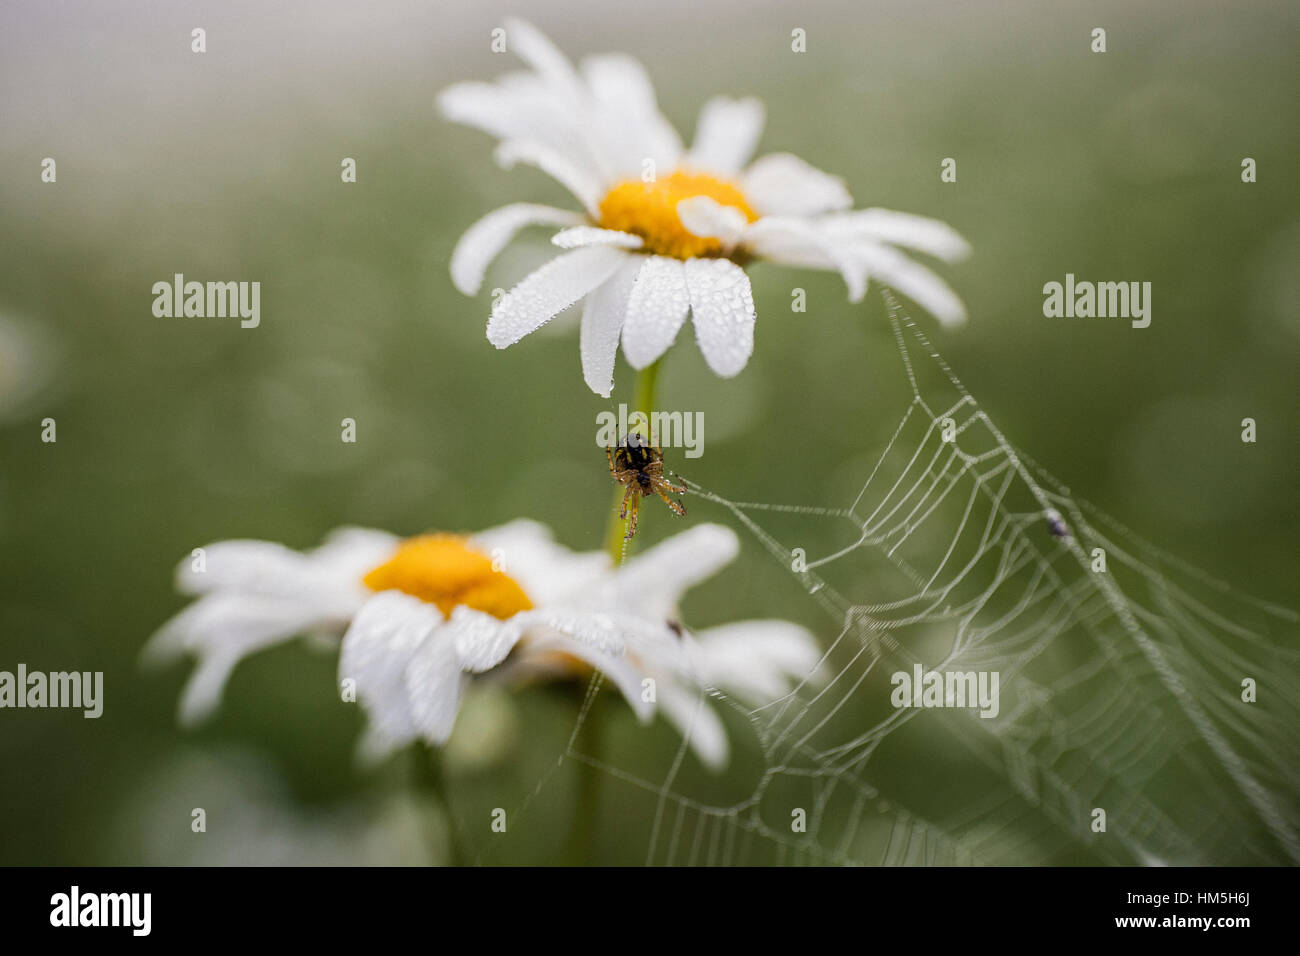 Spider and its web among oxeye daisies (Leucanthemum vulgare) Stock Photo